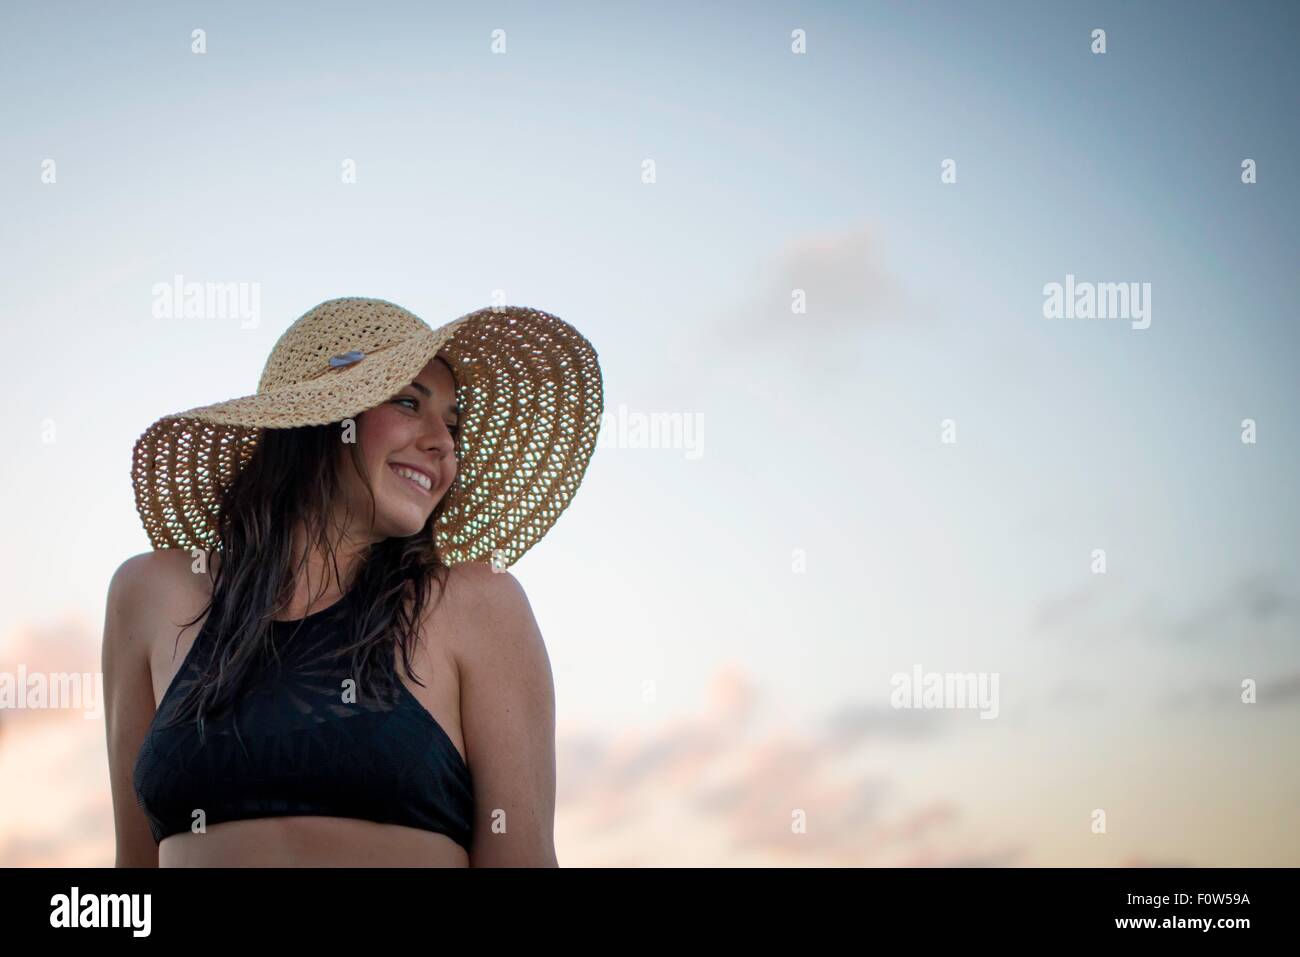 Portrait of young woman wearing sunhat Stock Photo